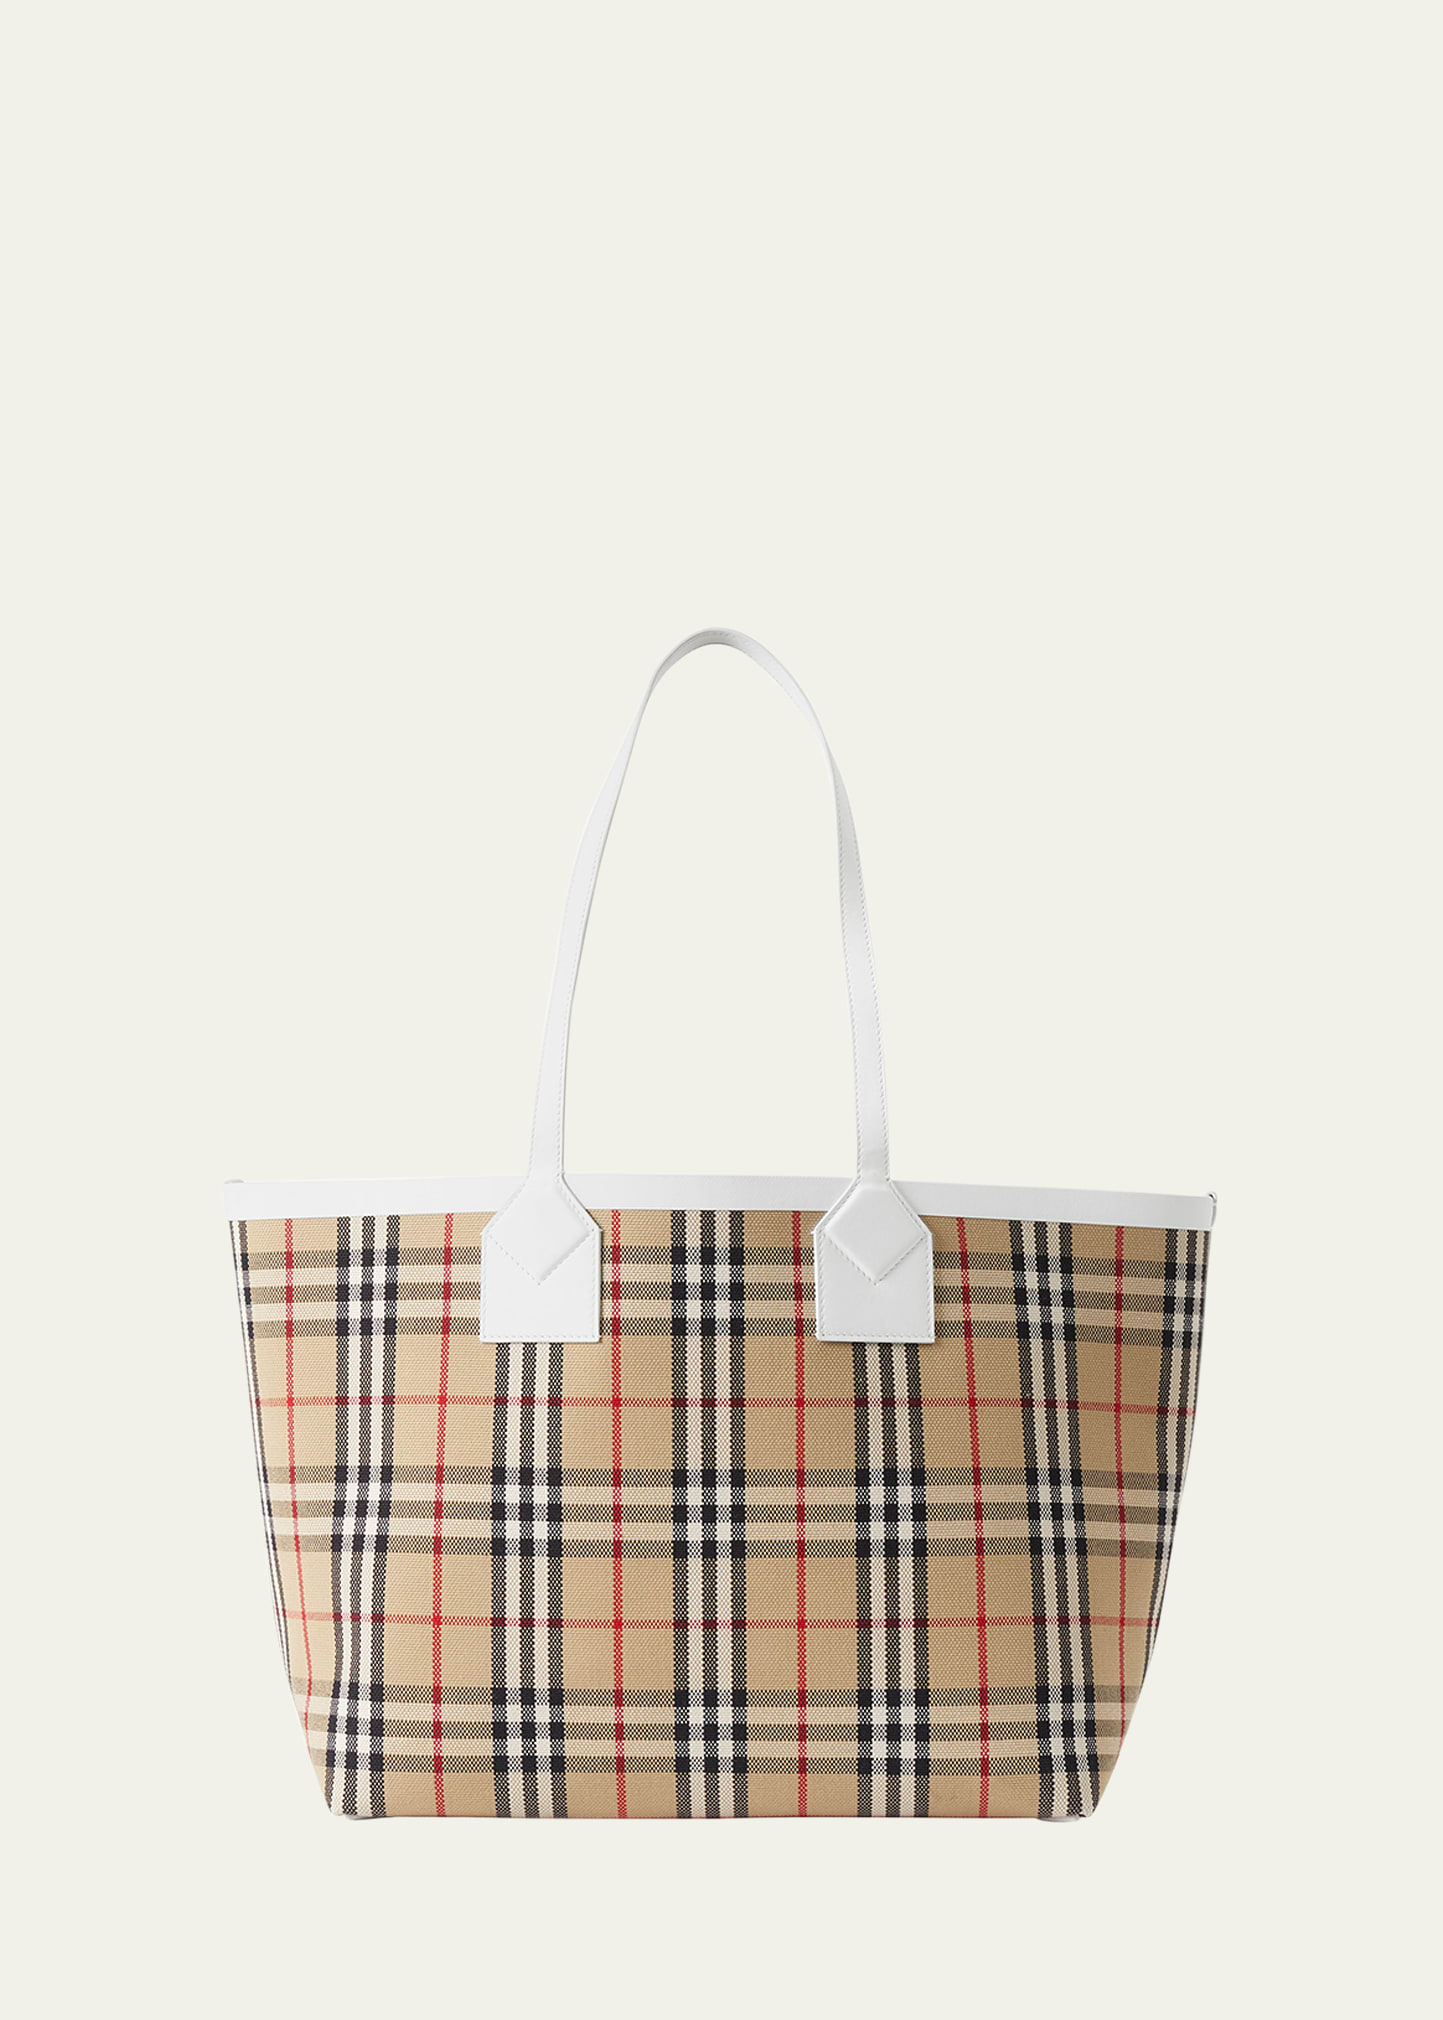 Burberry Check E-Canvas Tote Bag curated on LTK